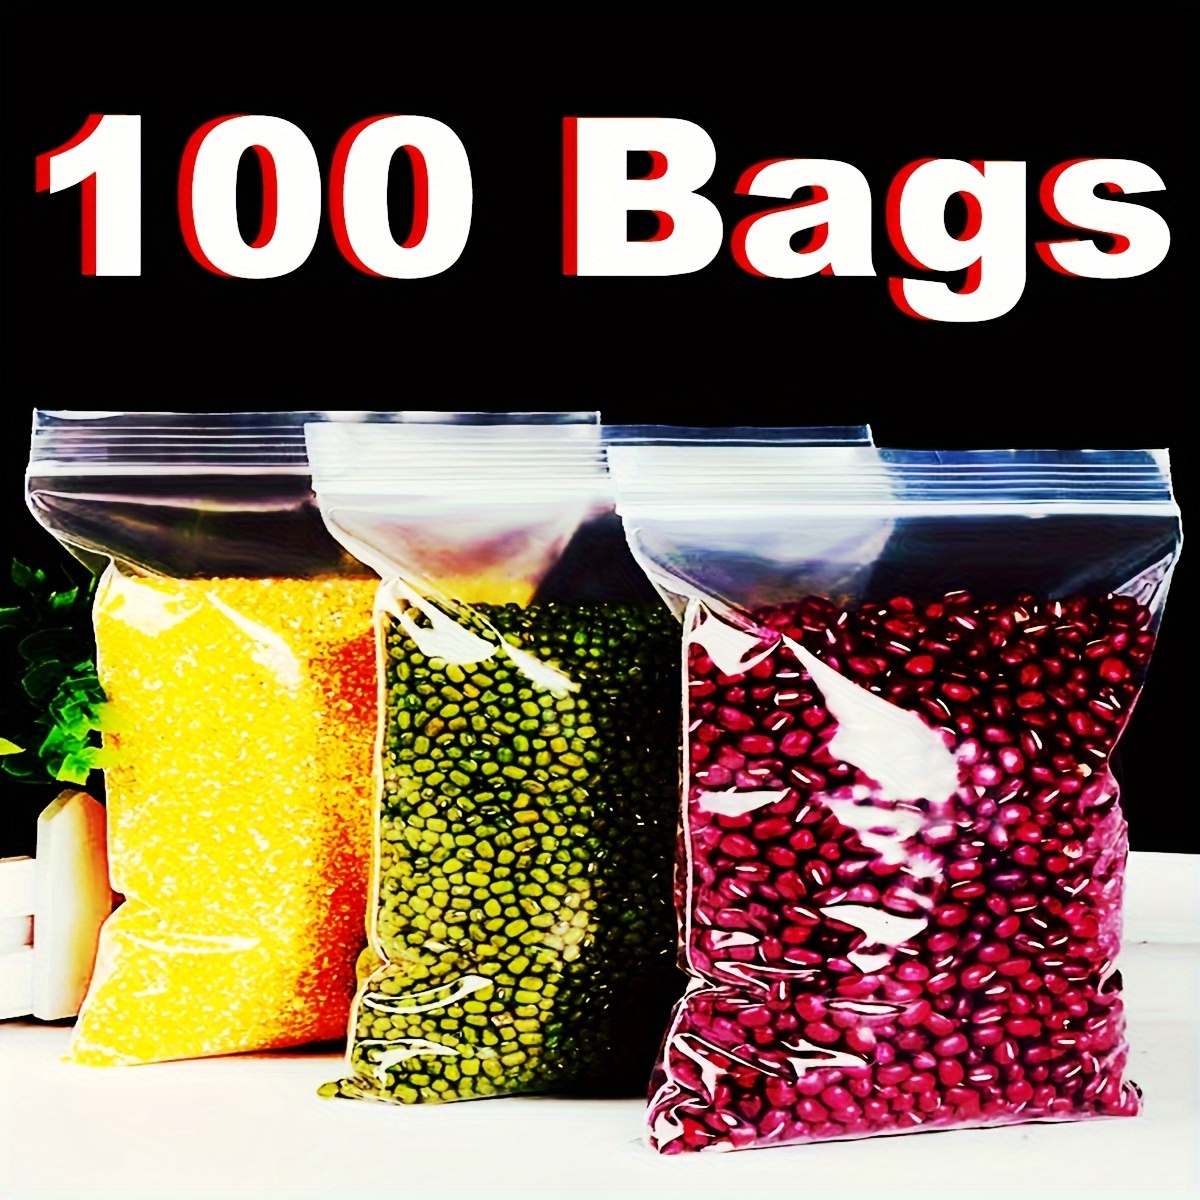 

100-piece Durable Leakproof Ziplock Bags 4.7"x4.7" - Perfect For Food Storage, Snacks, And Spices | Water & Stain Resistant